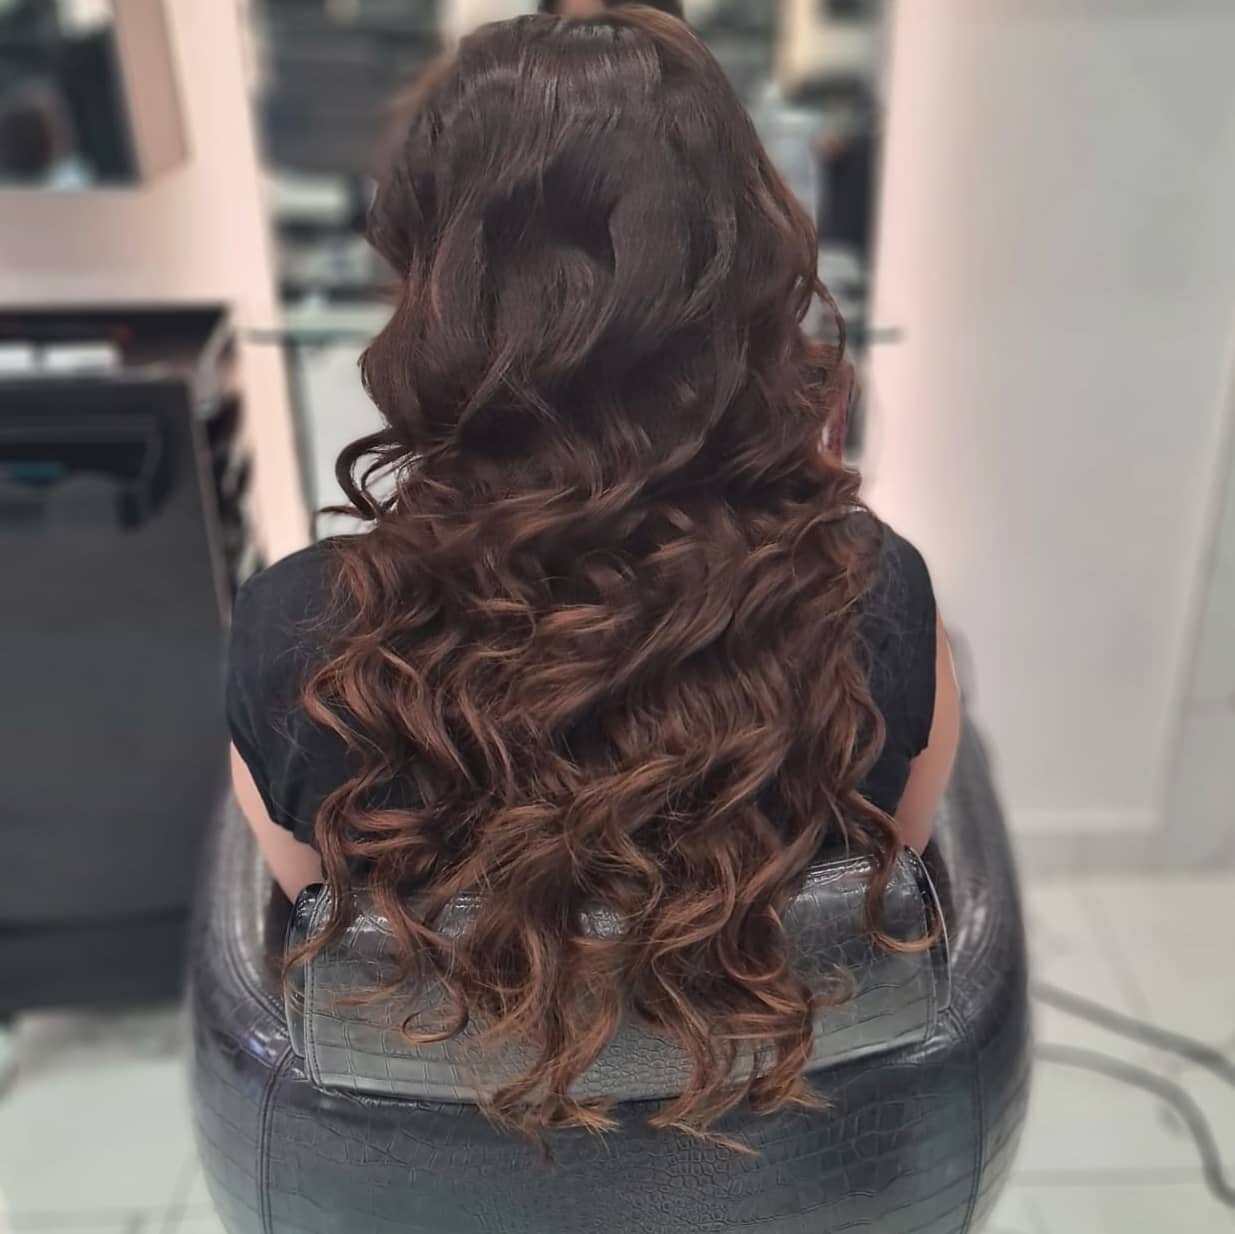 Rapunzel Rapunzel let your hair down! 
Creating long lasting curls, which stay firmly in place until your next wash. Long lasting fairy tale glam!

..... 

Styled by @beatacastielhair
.
.
.
.
.
.
.
.
.
.
#hairoftheday #hairstudio #lorealsalon #rapunz